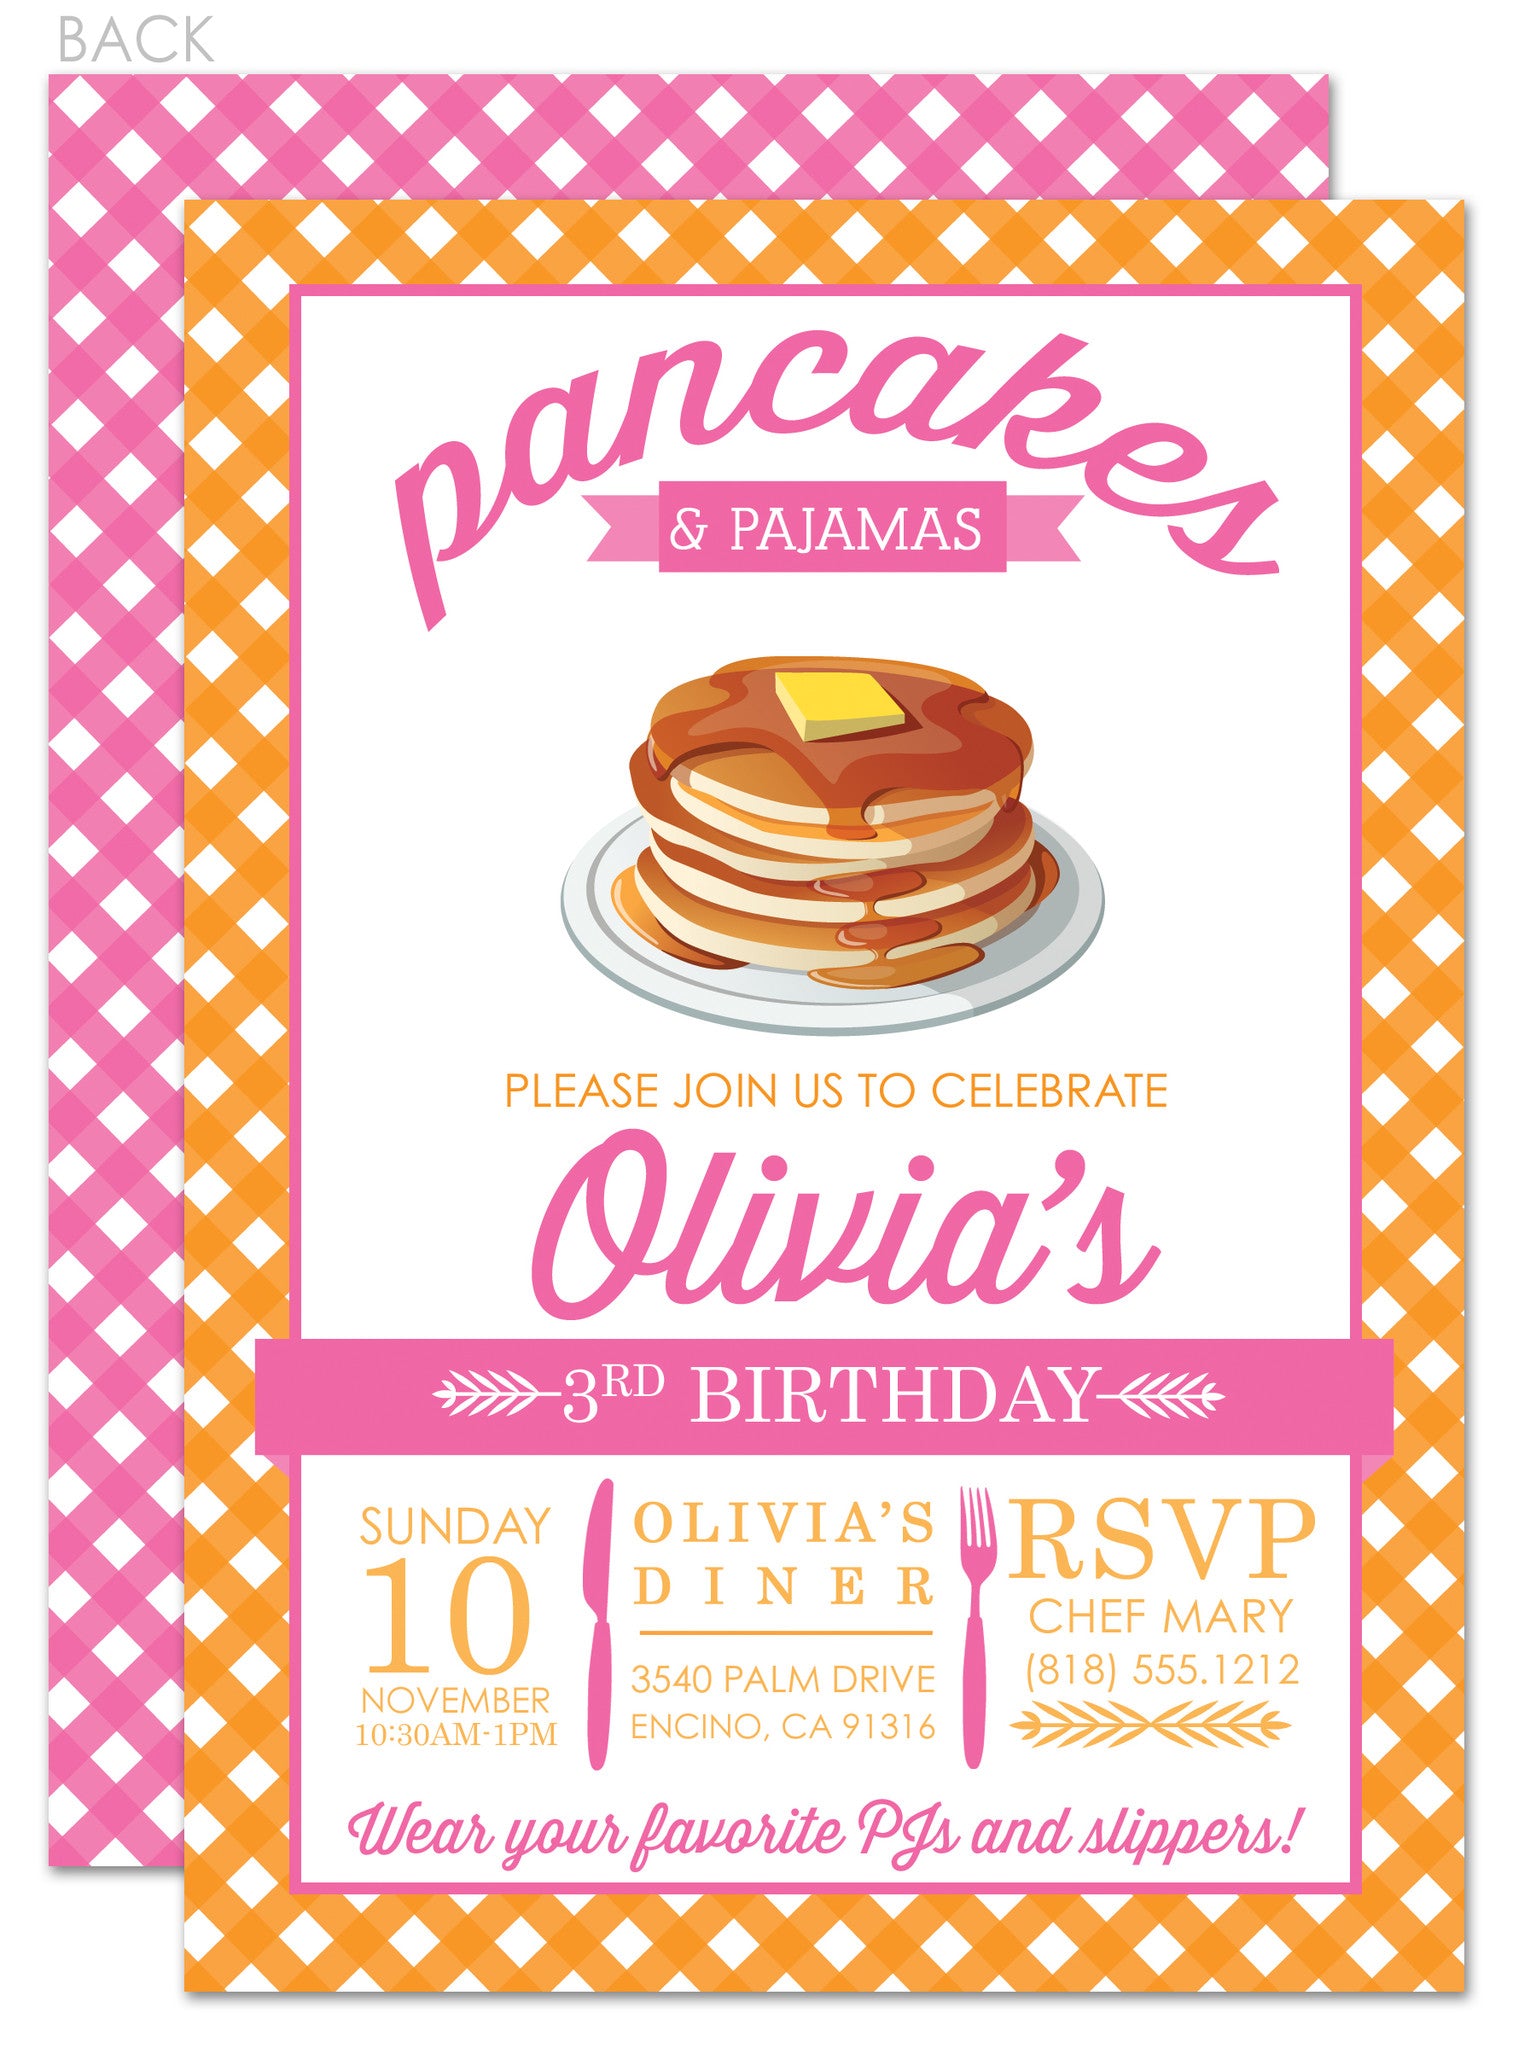 Pancakes and pajamas party invitation, in pink and orange, printed on premium heavweight cardstock, Pipsy.com